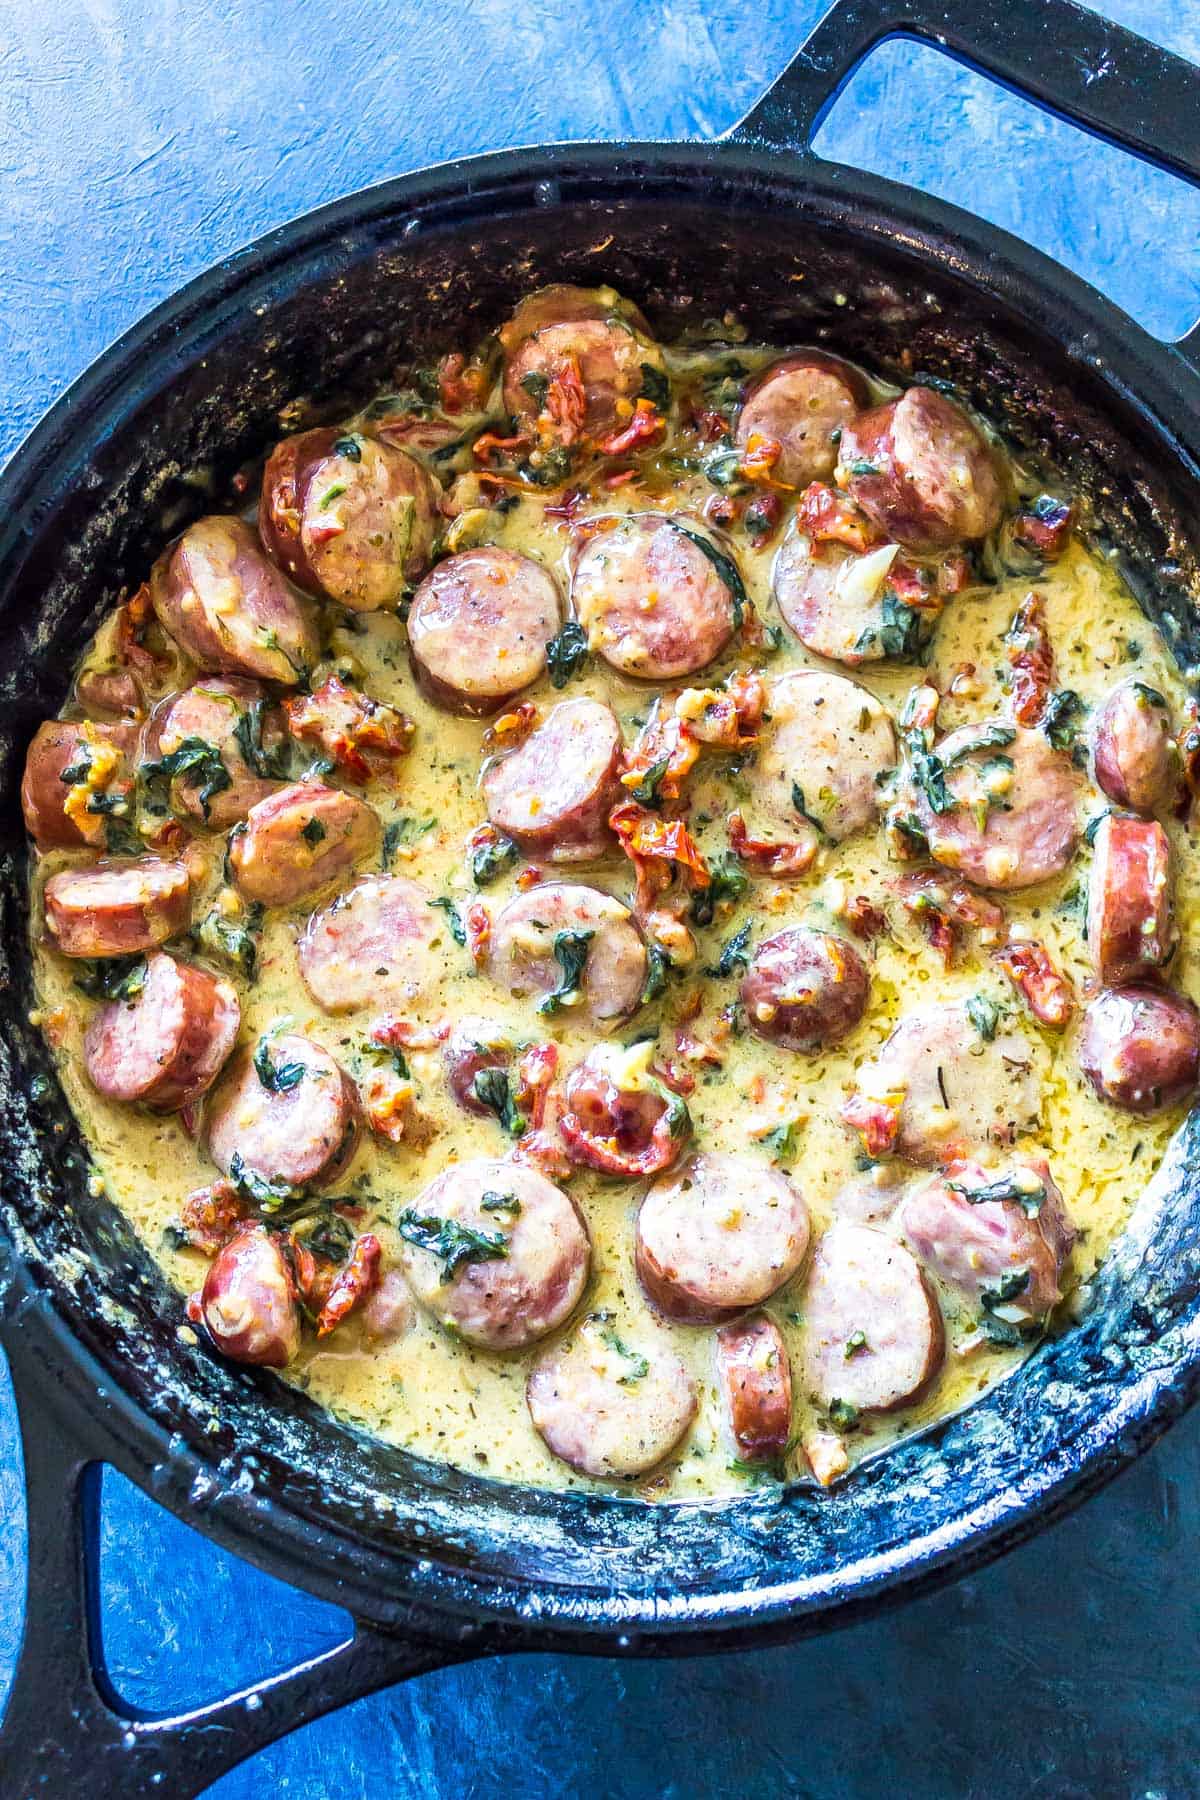 Sausage an creamy sauce in a cast iron skillet